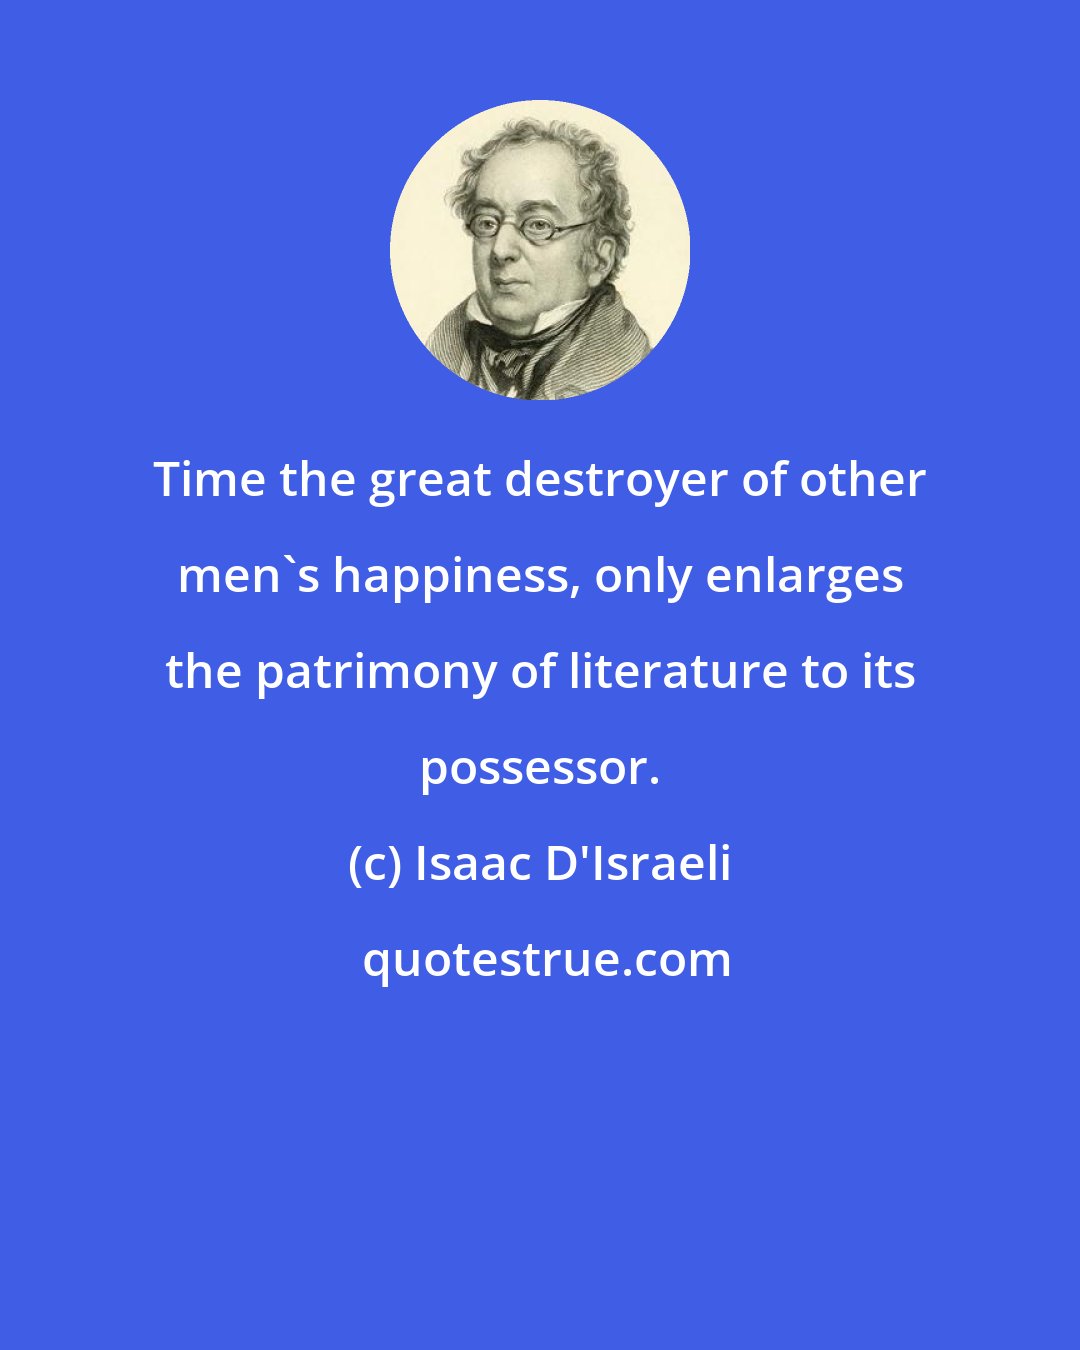 Isaac D'Israeli: Time the great destroyer of other men's happiness, only enlarges the patrimony of literature to its possessor.